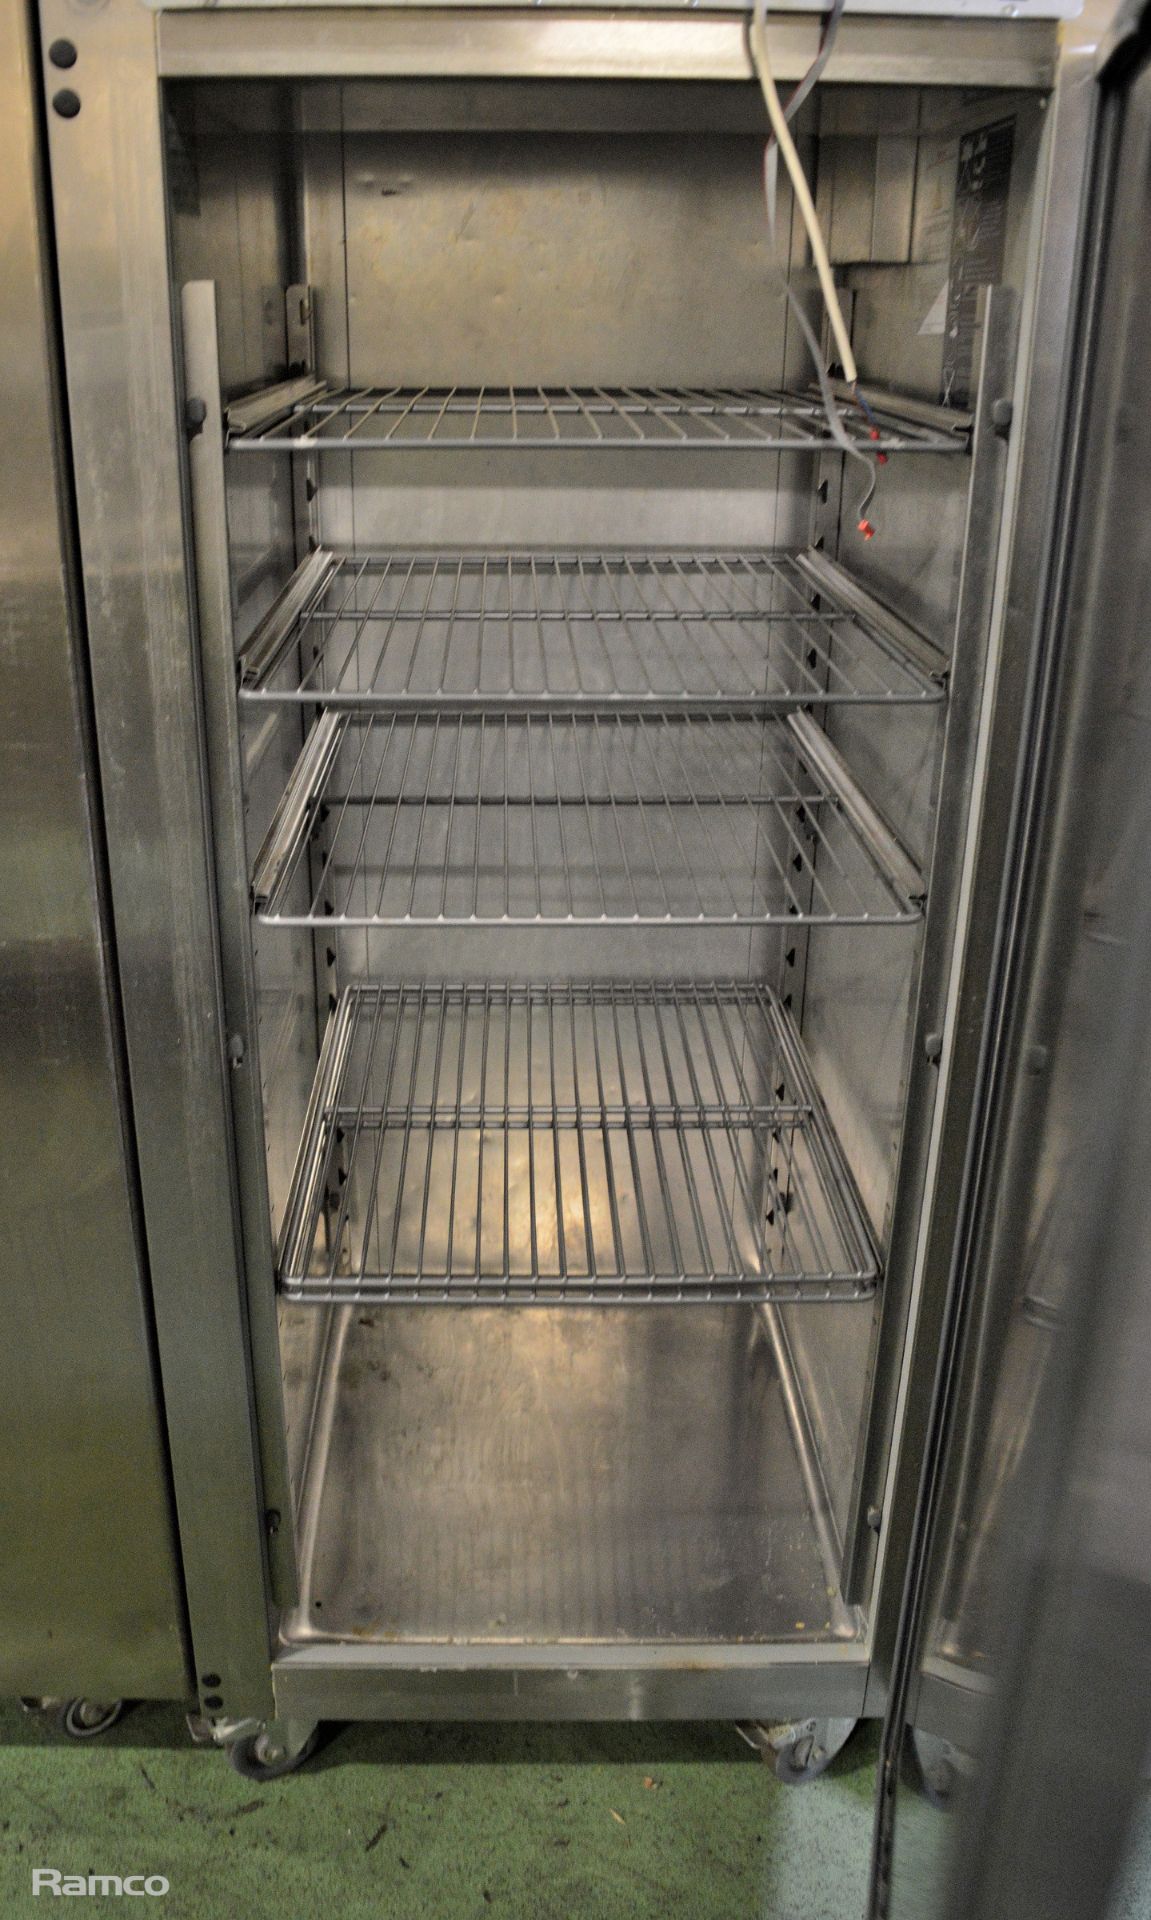 Williams LJ1SA R290 R1 Upright Freezer - L740 x W820 x H1960mm (front panel not fitted) - Image 3 of 5